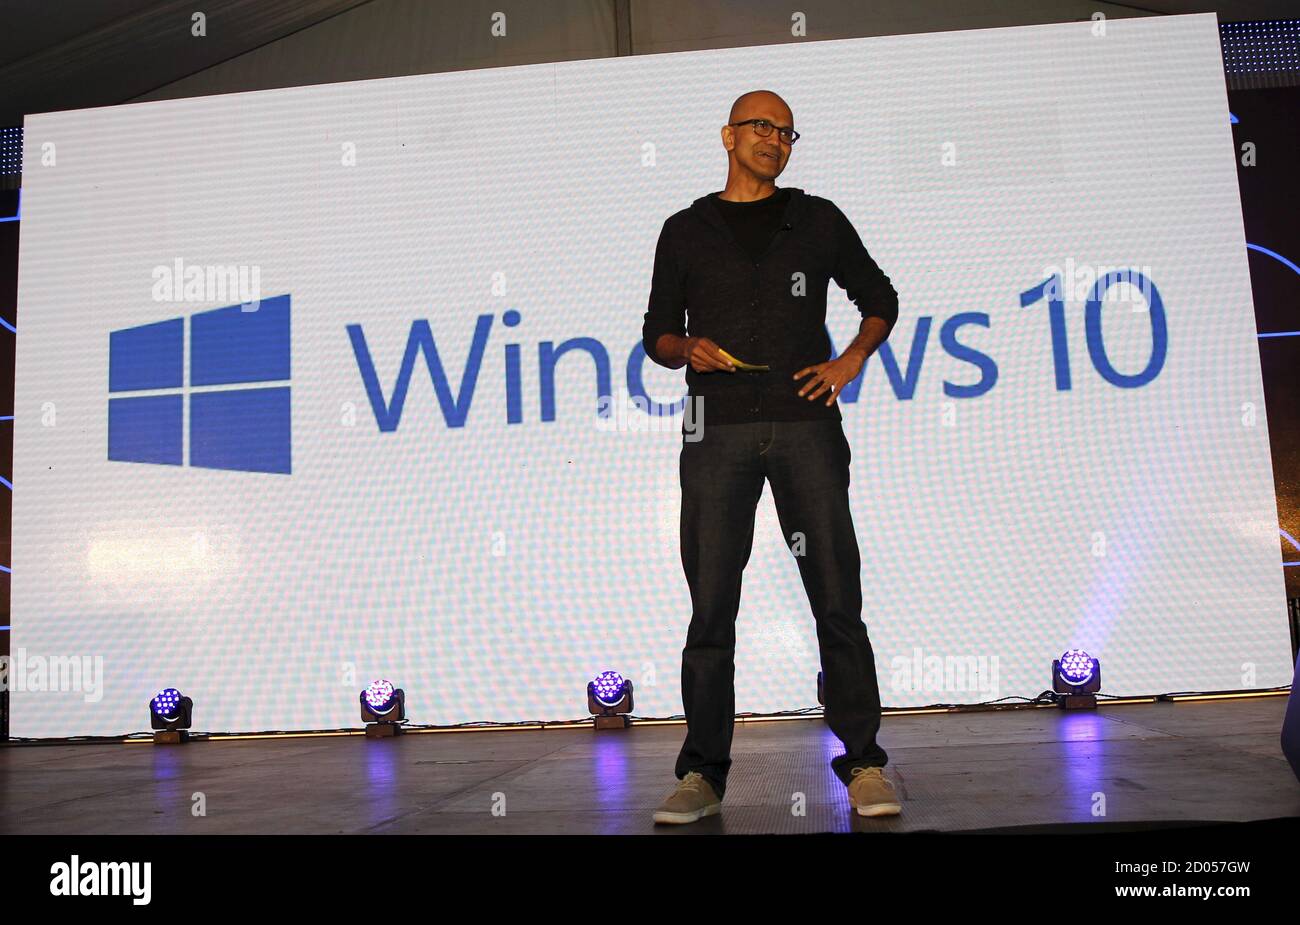 Microsoft CEO Satya Nadella addresses delegates during the launch of the Windows 10 operating system in Kenya's capital Nairobi, July 29, 2015. Microsoft Corp's launch of its first new operating system in almost three years, designed to work across laptops, desktop and smartphones, won mostly positive reviews for its user-friendly and feature-packed interface. REUTERS/Thomas Mukoya Stock Photo